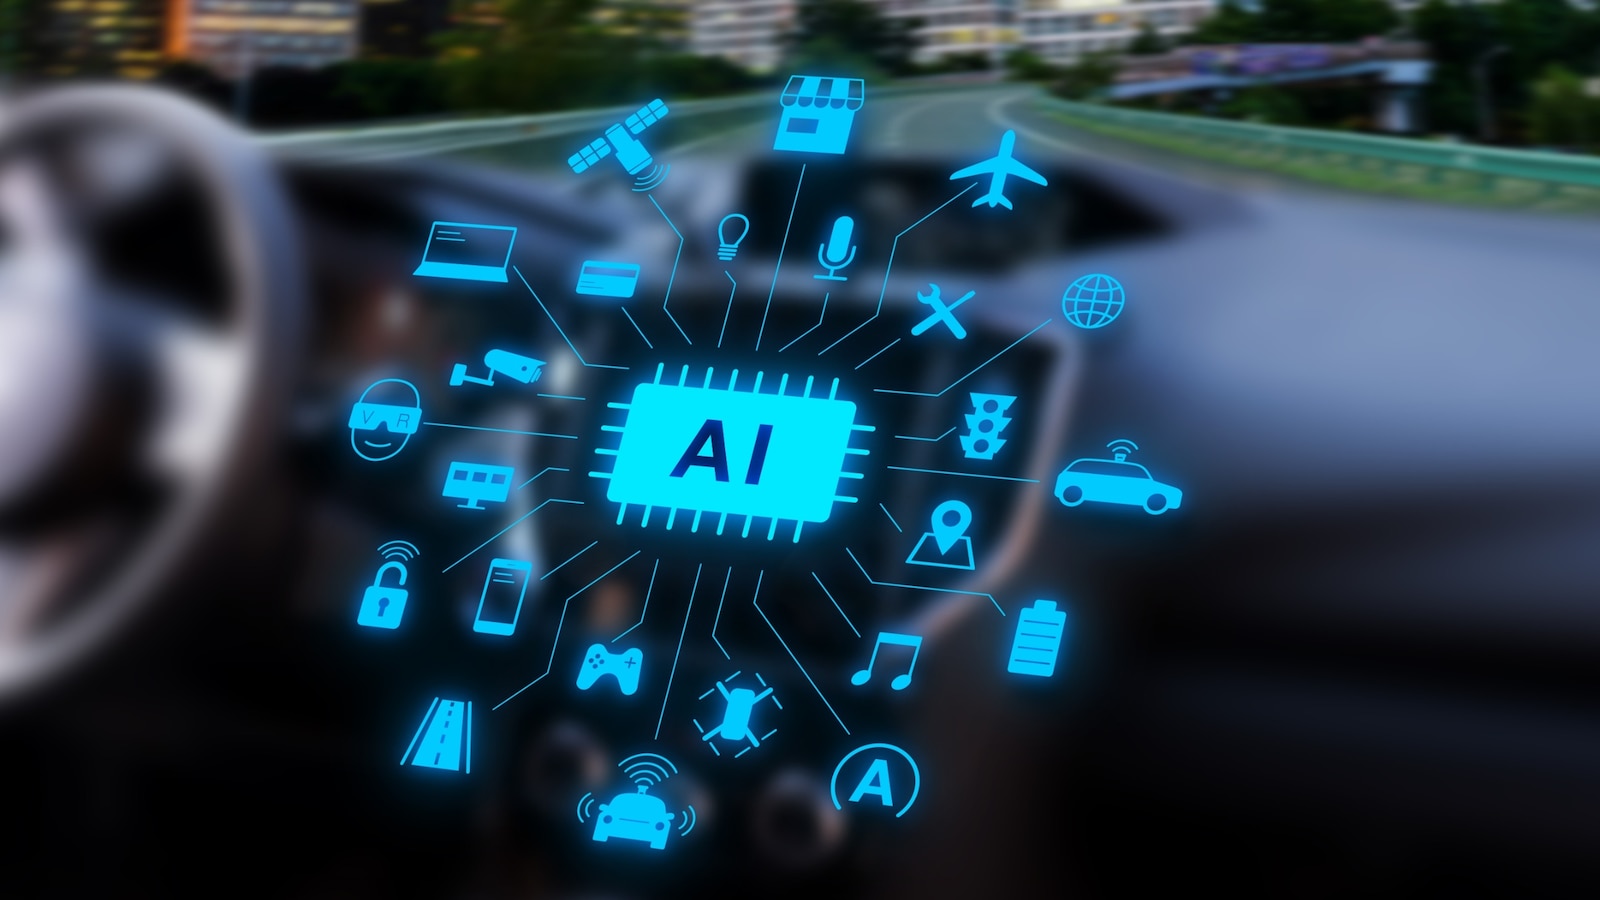 Meet your new virtual assistant: The AI in your car